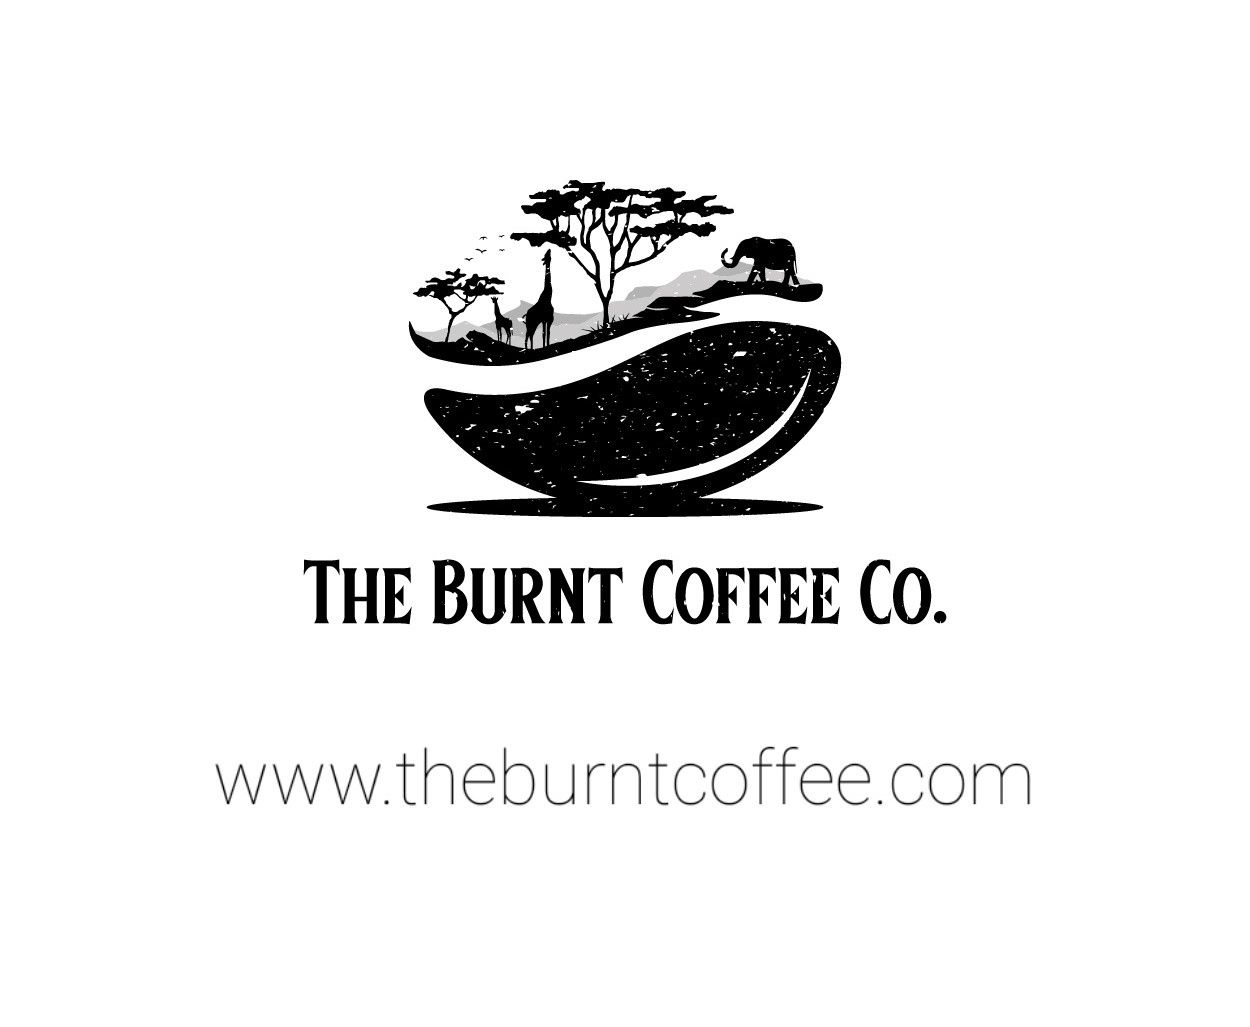 Fresh African Sourced Beans - The Burnt Coffee Company